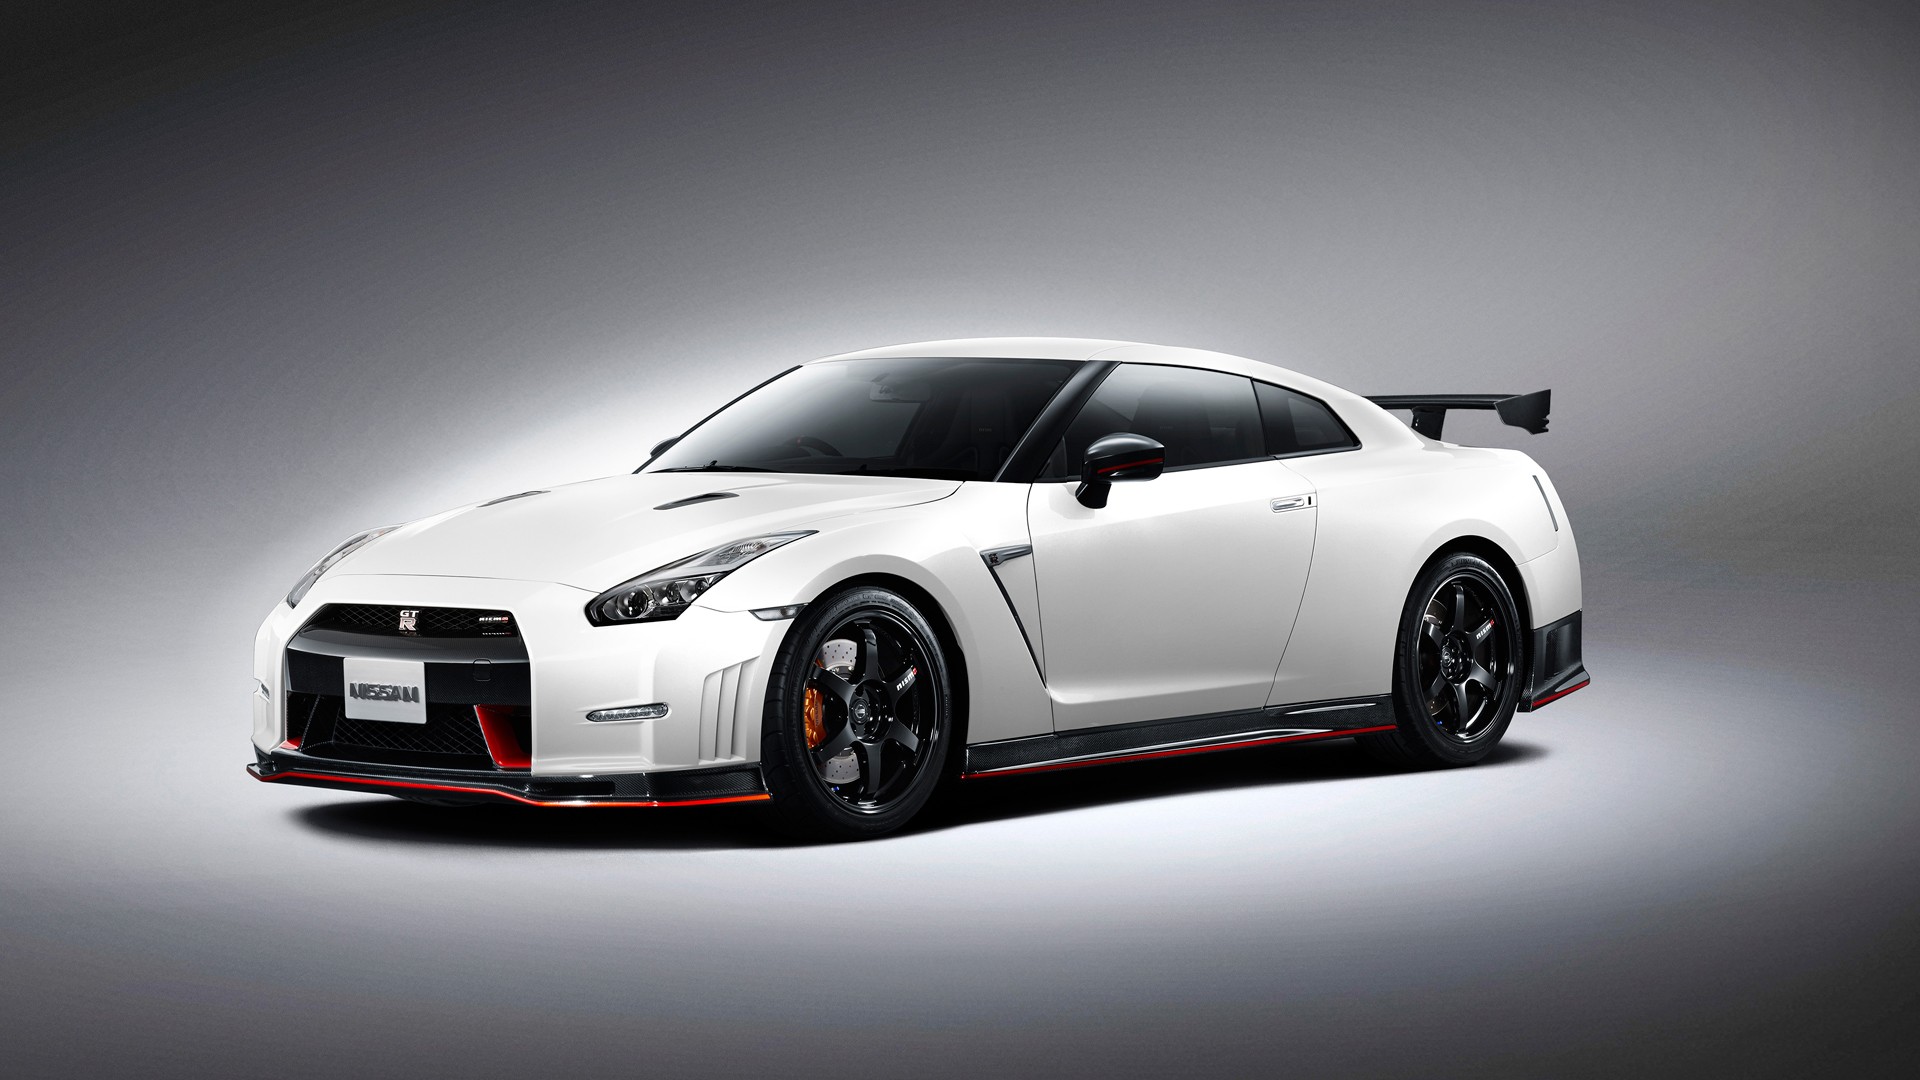 Download Nissan Nissan Gt R Nismo Car Vehicle White Cars Side View Wallpapers Hd Desktop And Mobile Backgrounds